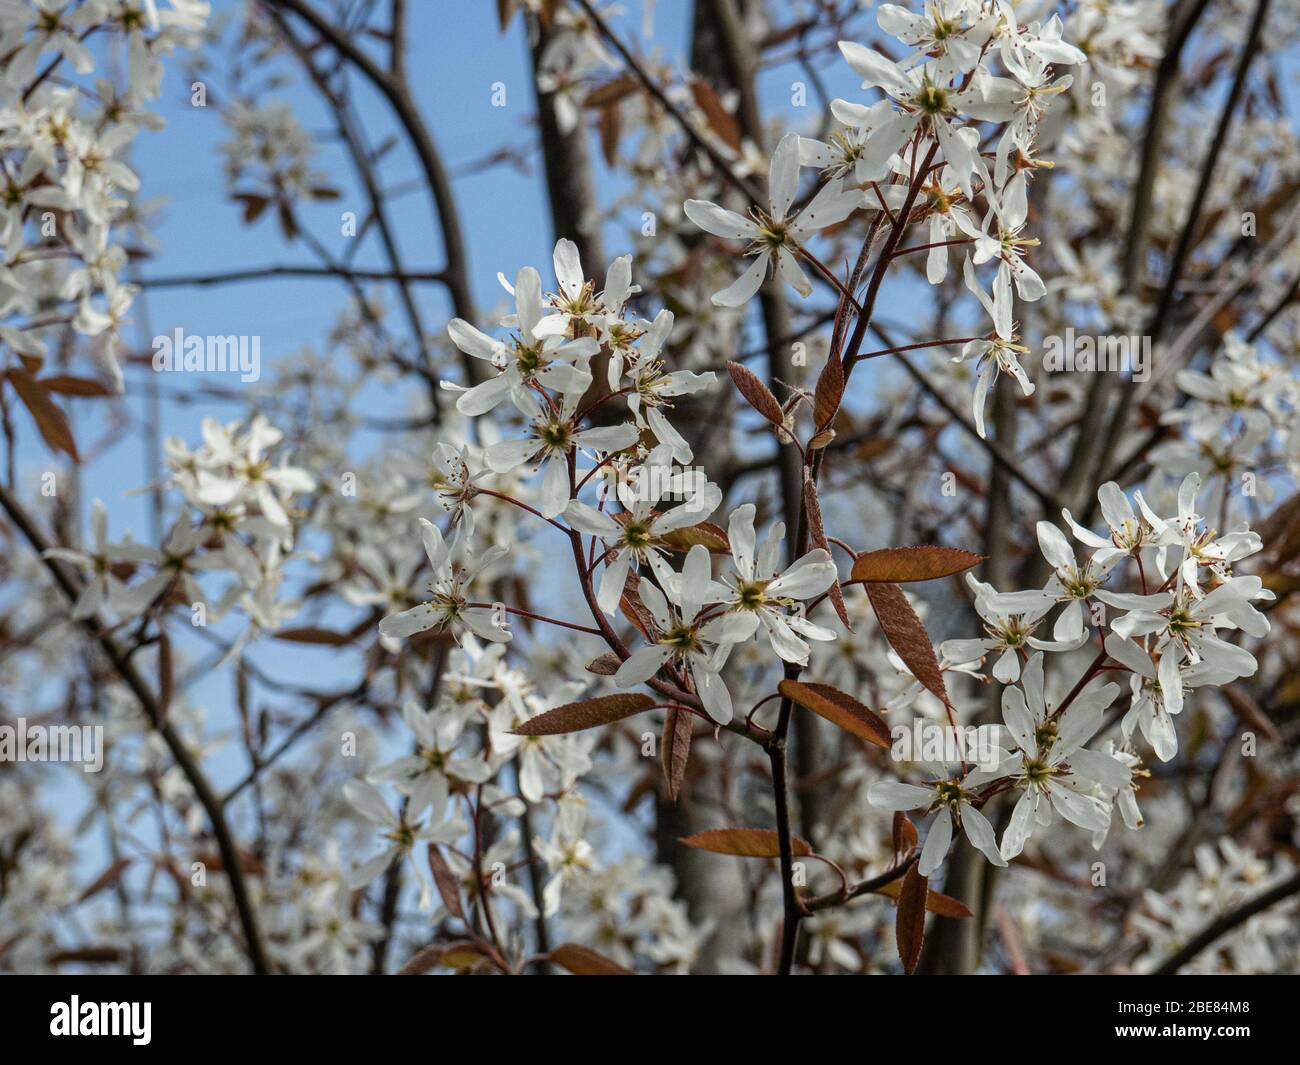 The delicate white flowers of Amelanchier lamarckii Stock Photo